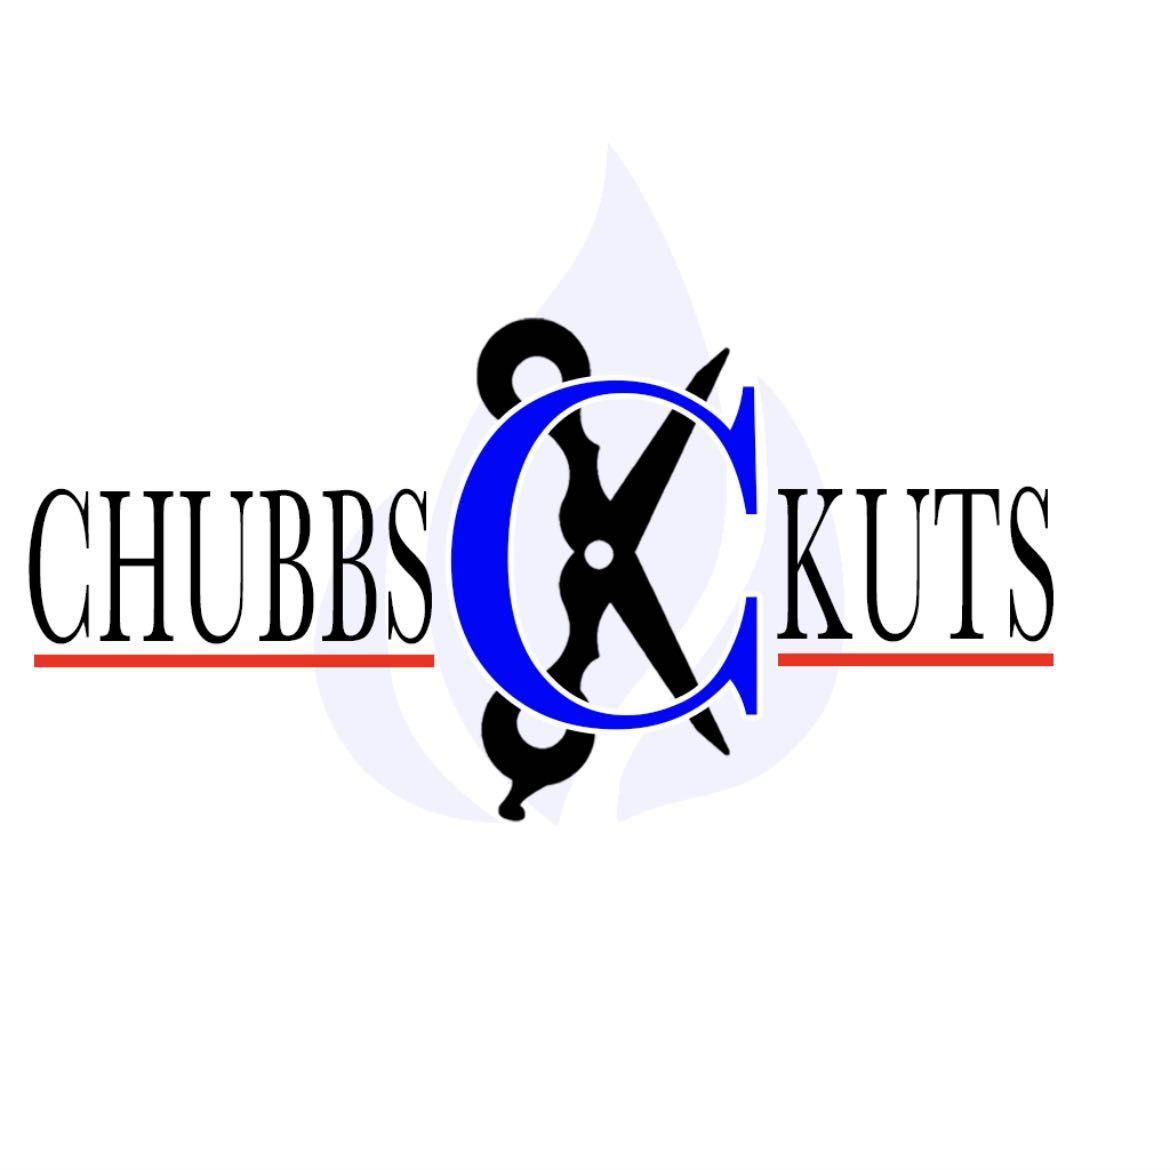 Chubbs kuts corp, 12639 NW 17th Ave, Miami, 33167